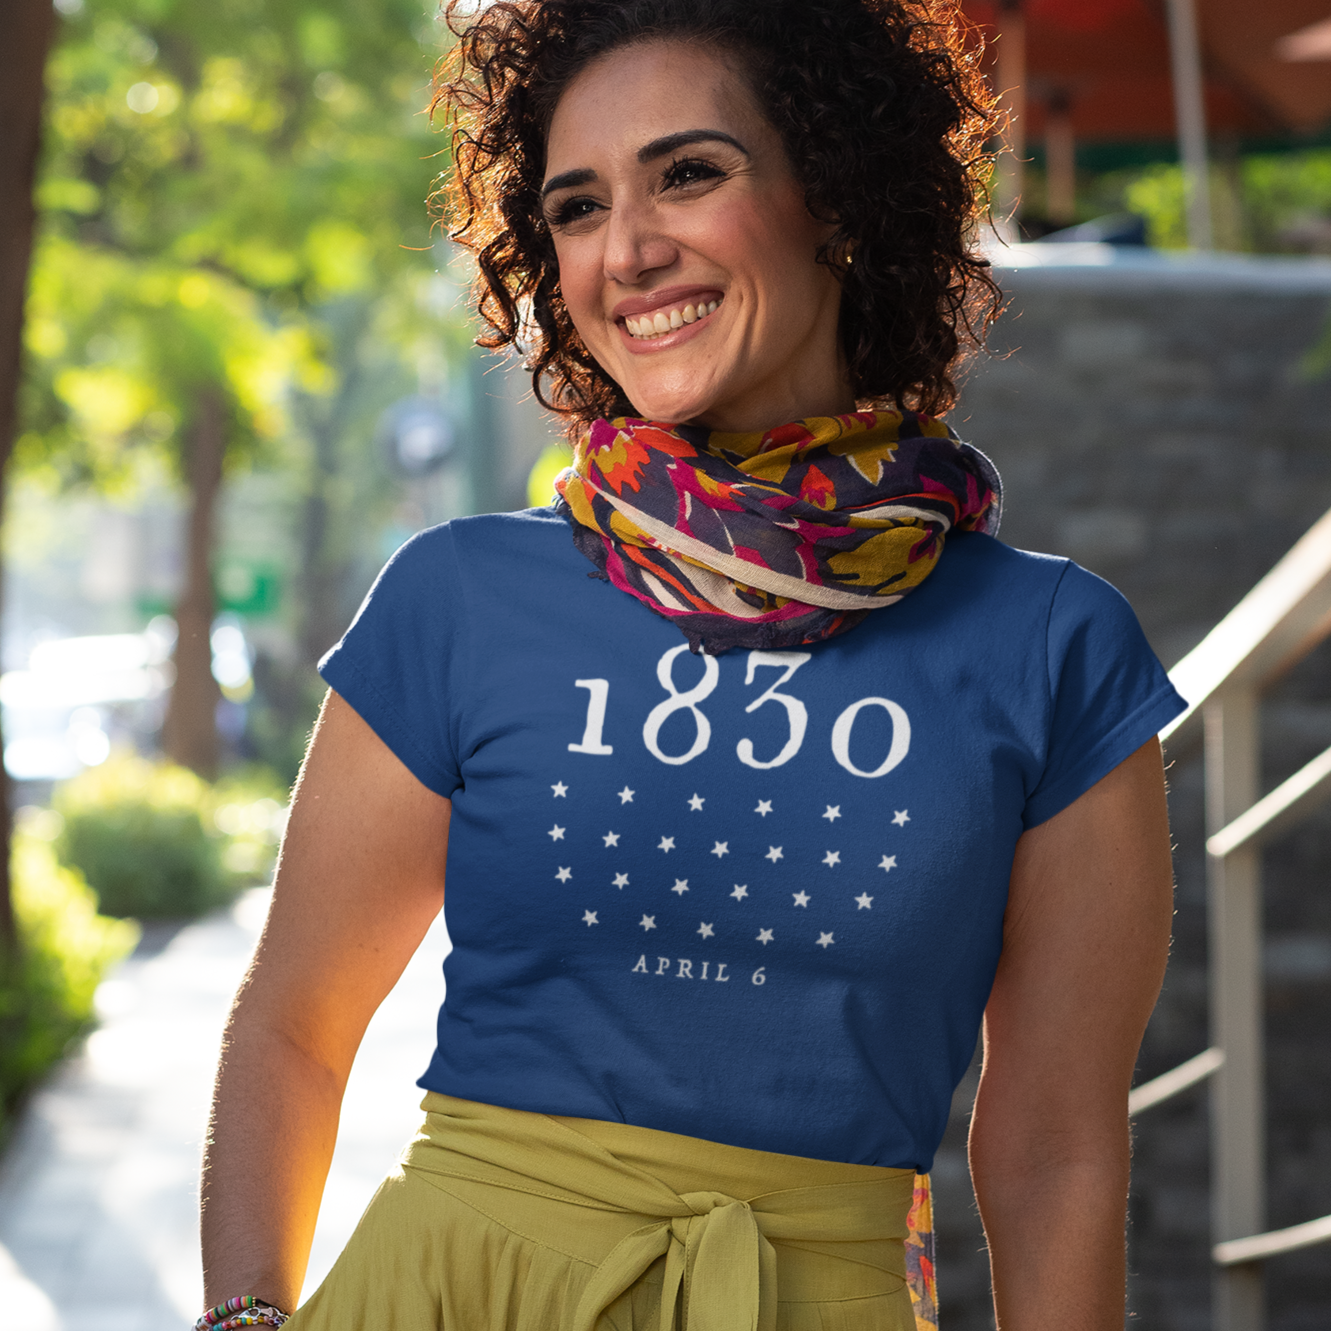 Woman wearing an LDS shirt with 1830 printed in white